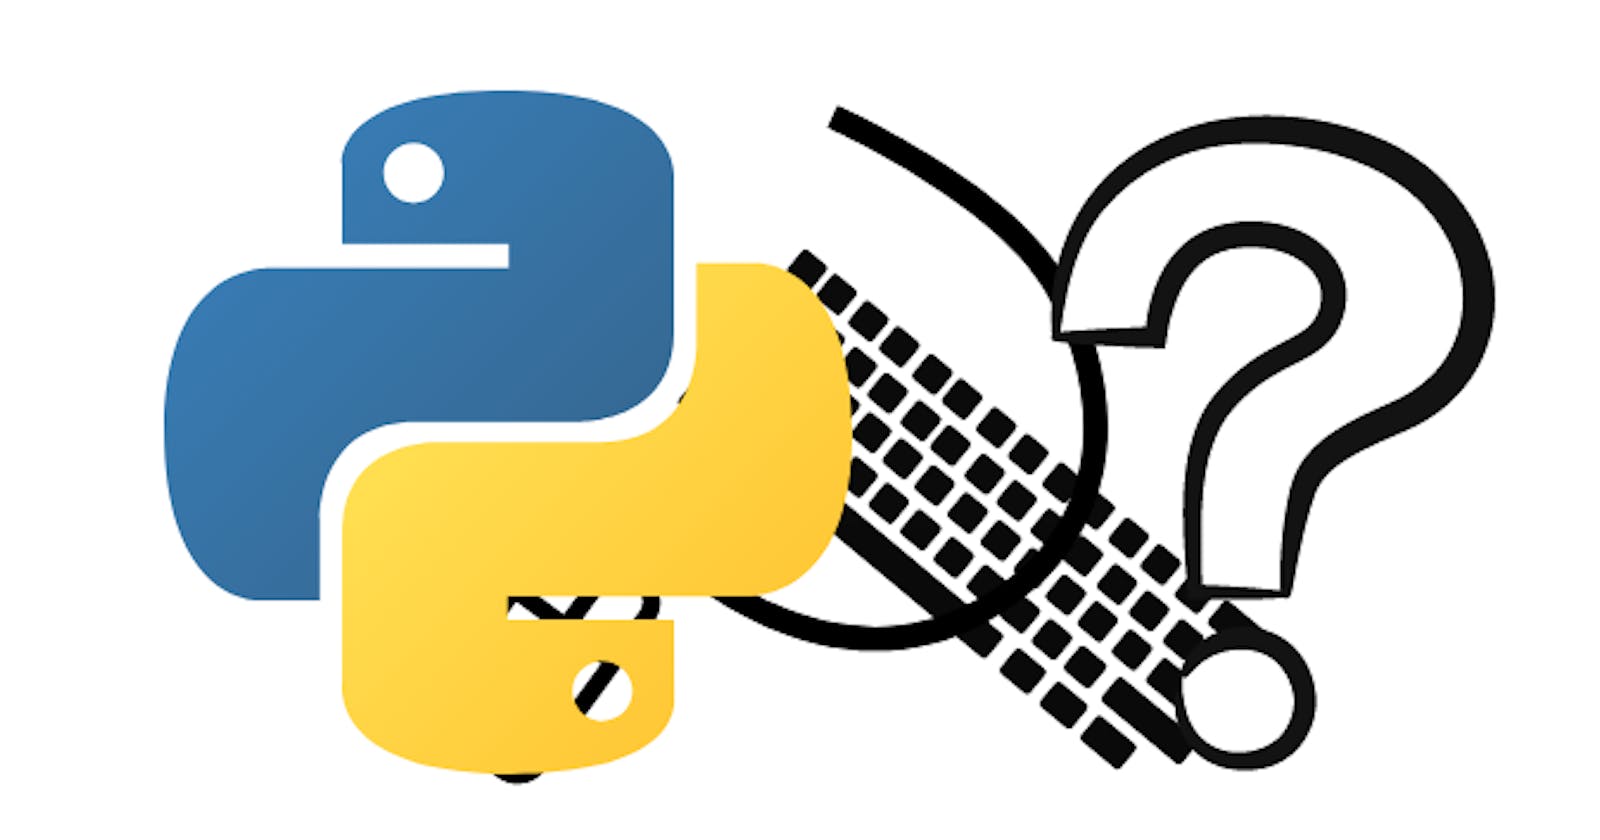 How to Control Mouse and Keyboard with Python